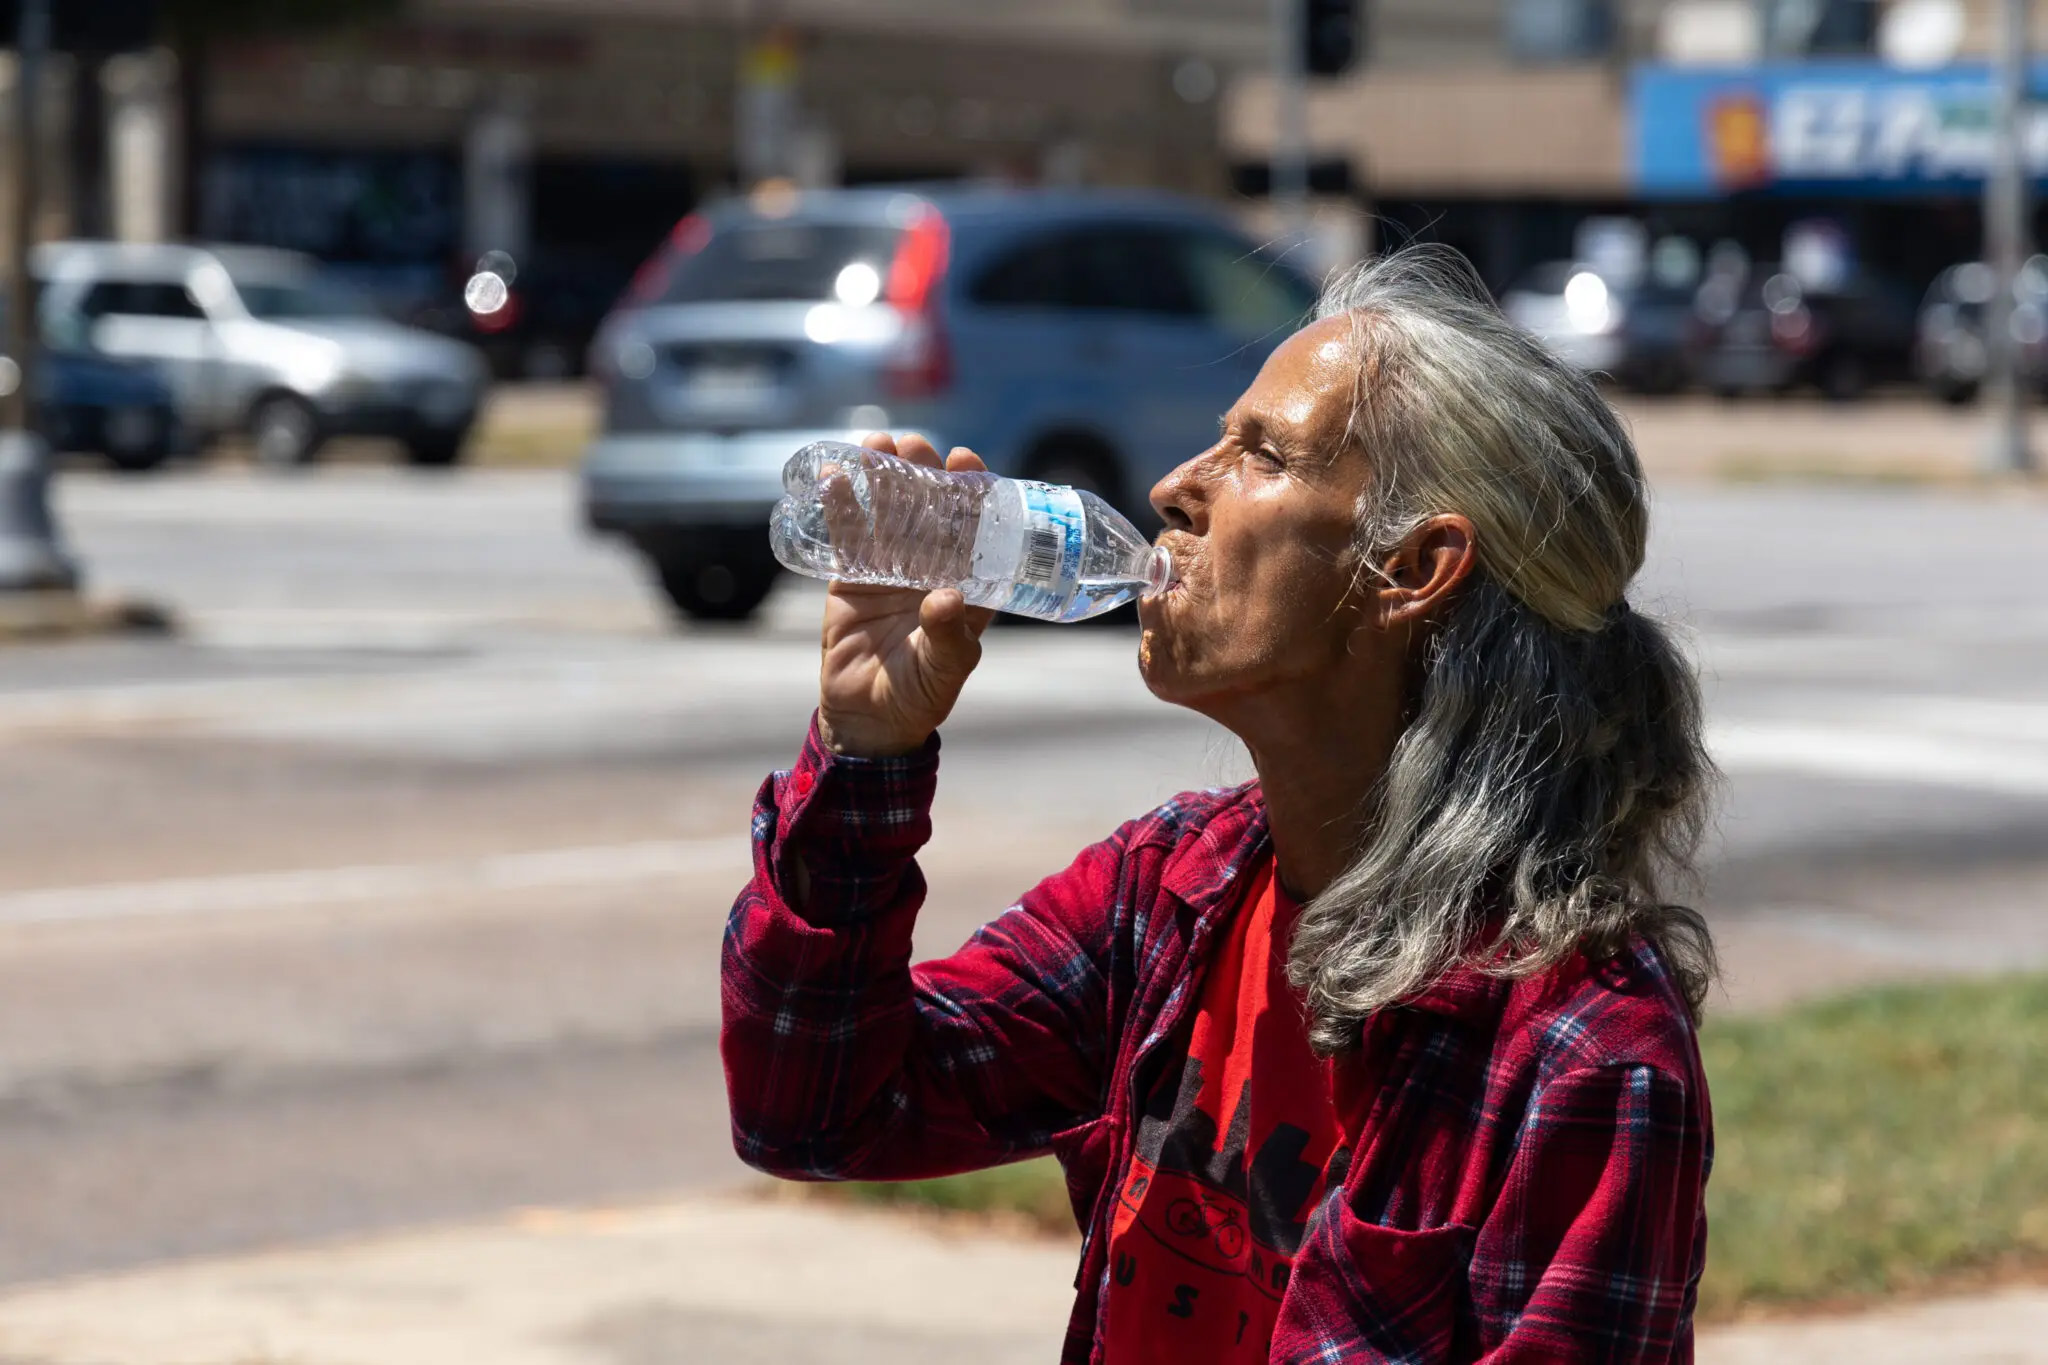 A grey-haired woman takes a drink from a bottle of water on a sunny day outside.